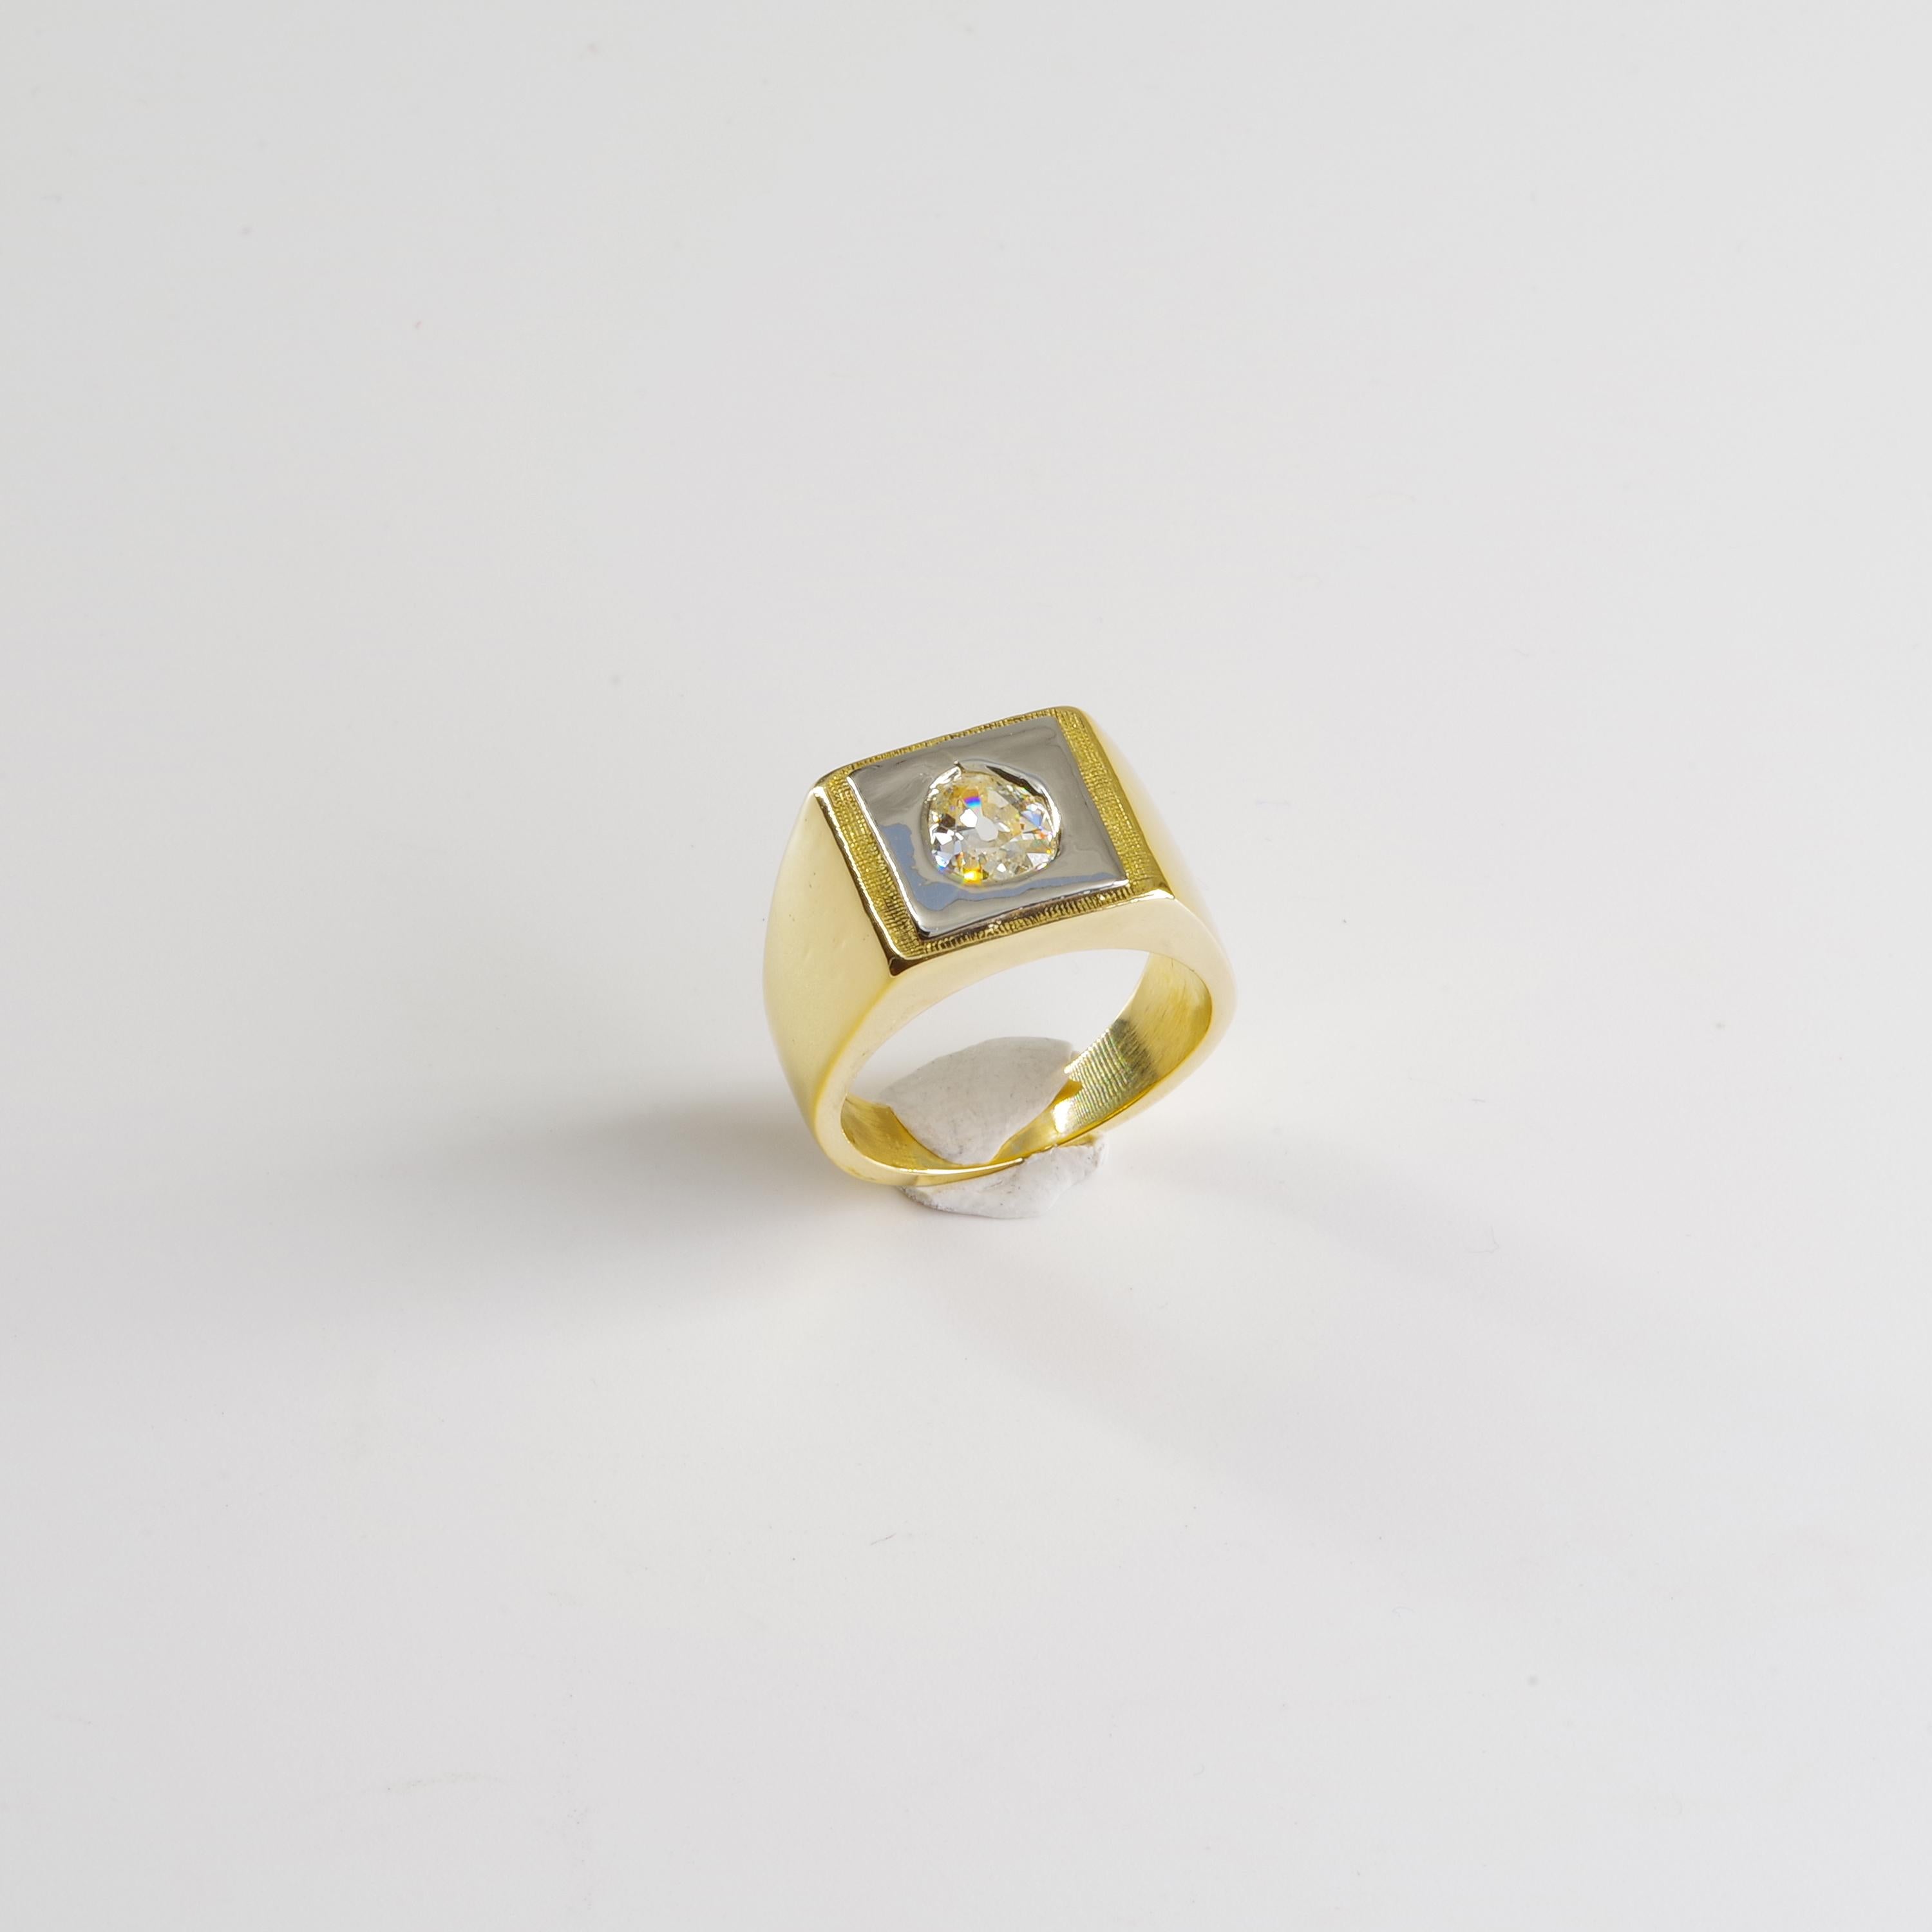 Old Mine Cut Diamond Signet Ring from France, circa 1940